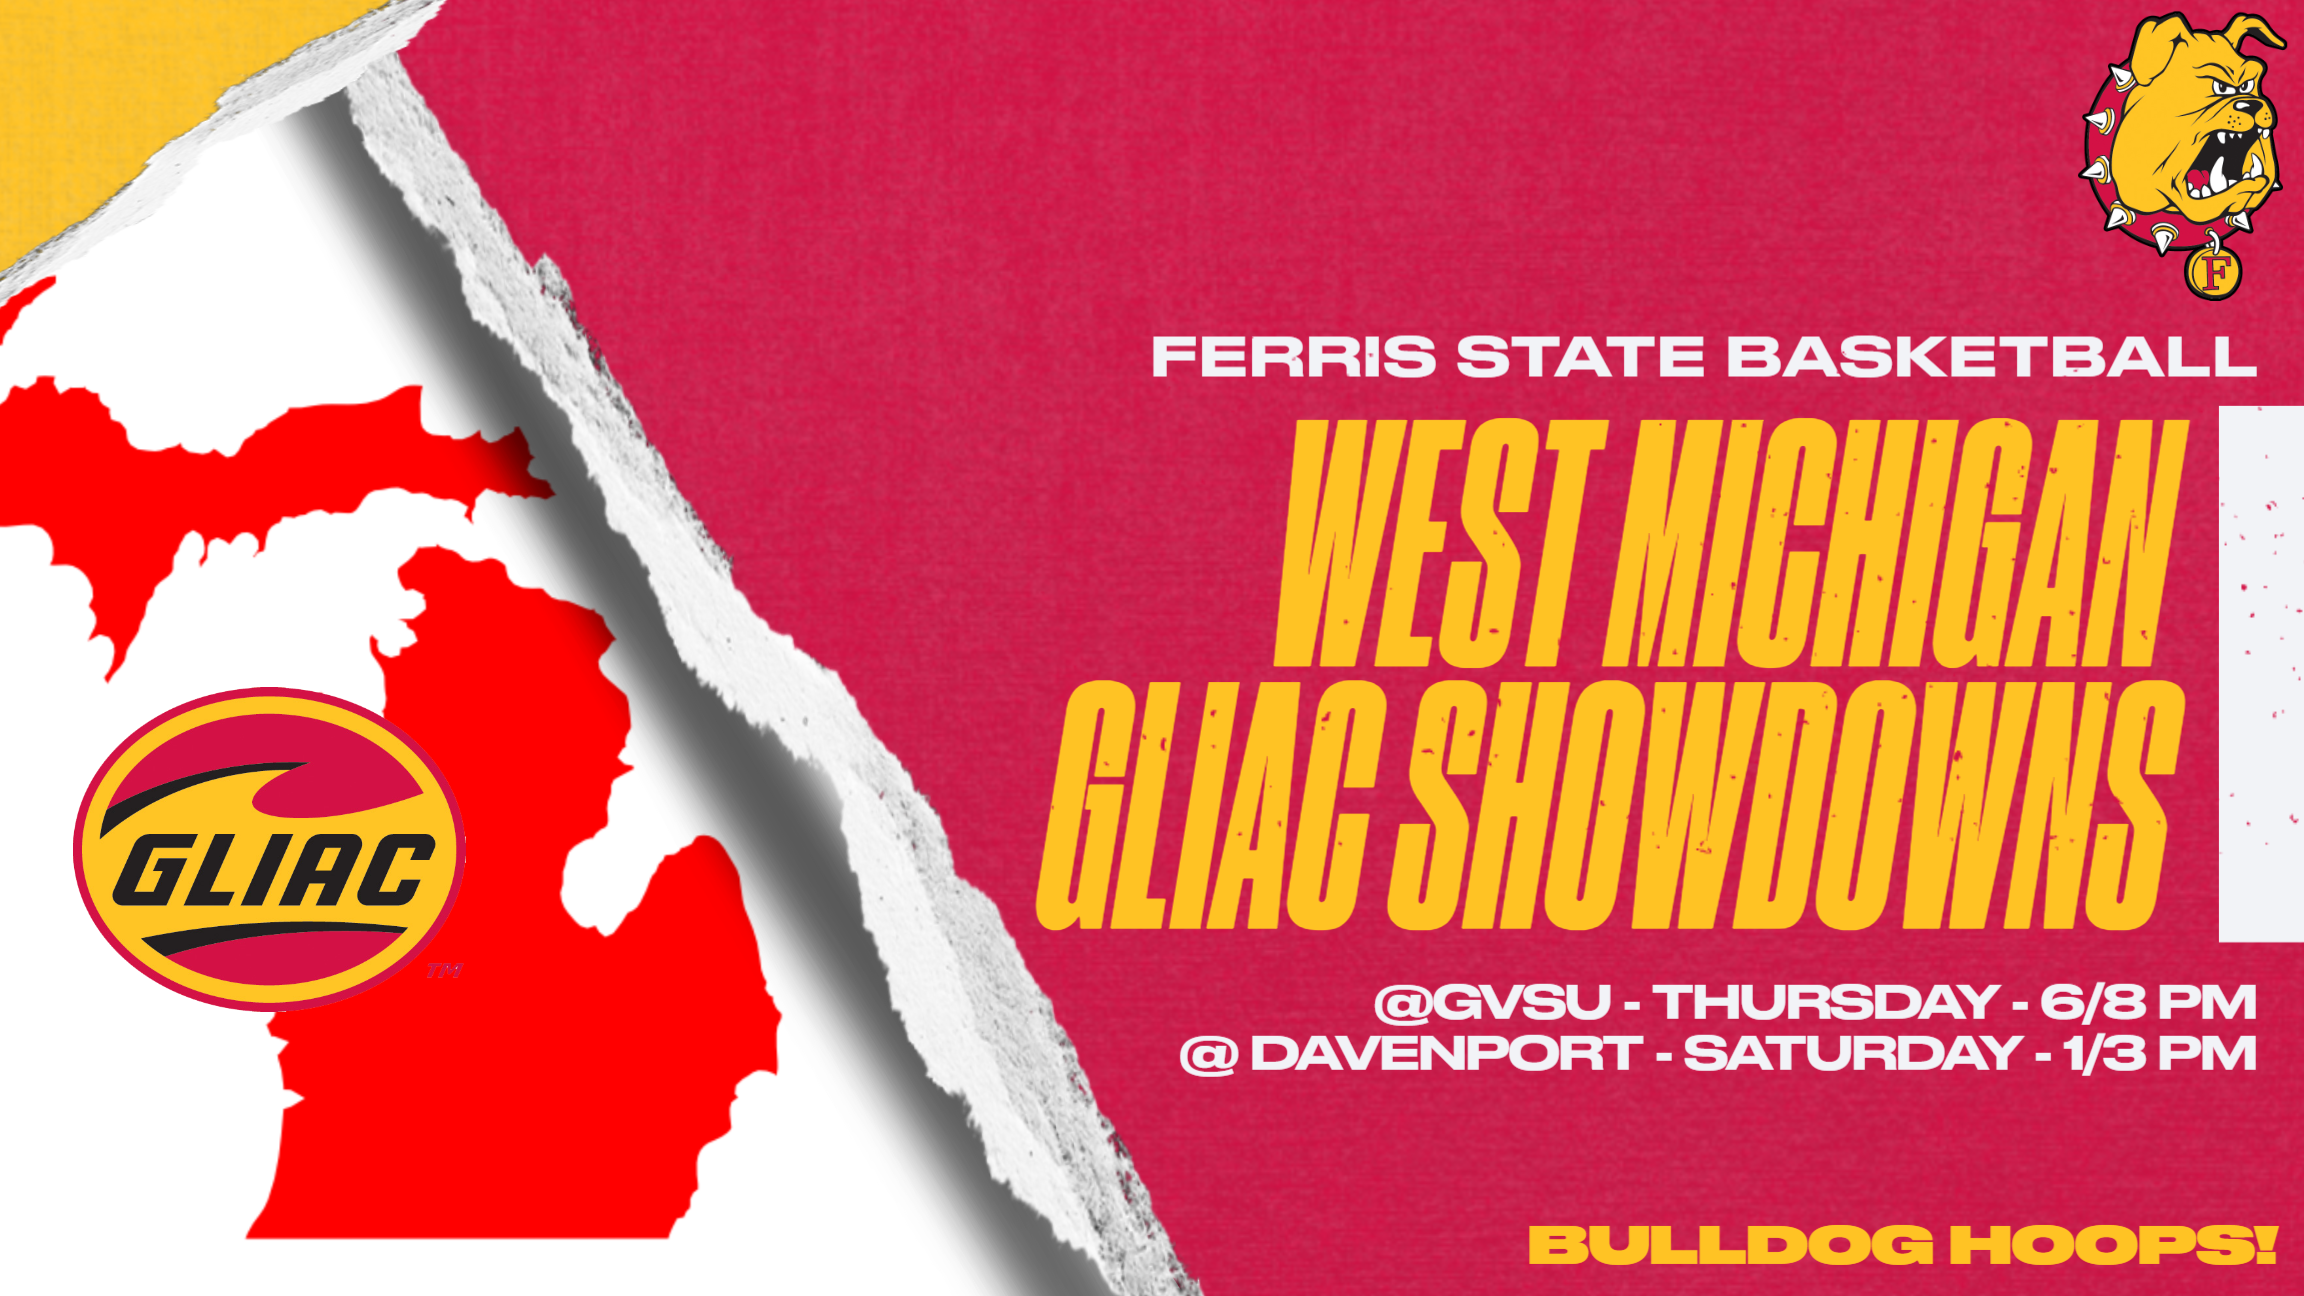 League-Leading Ferris State Basketball Squads Face West Michigan Rivals This Week In GLIAC Play